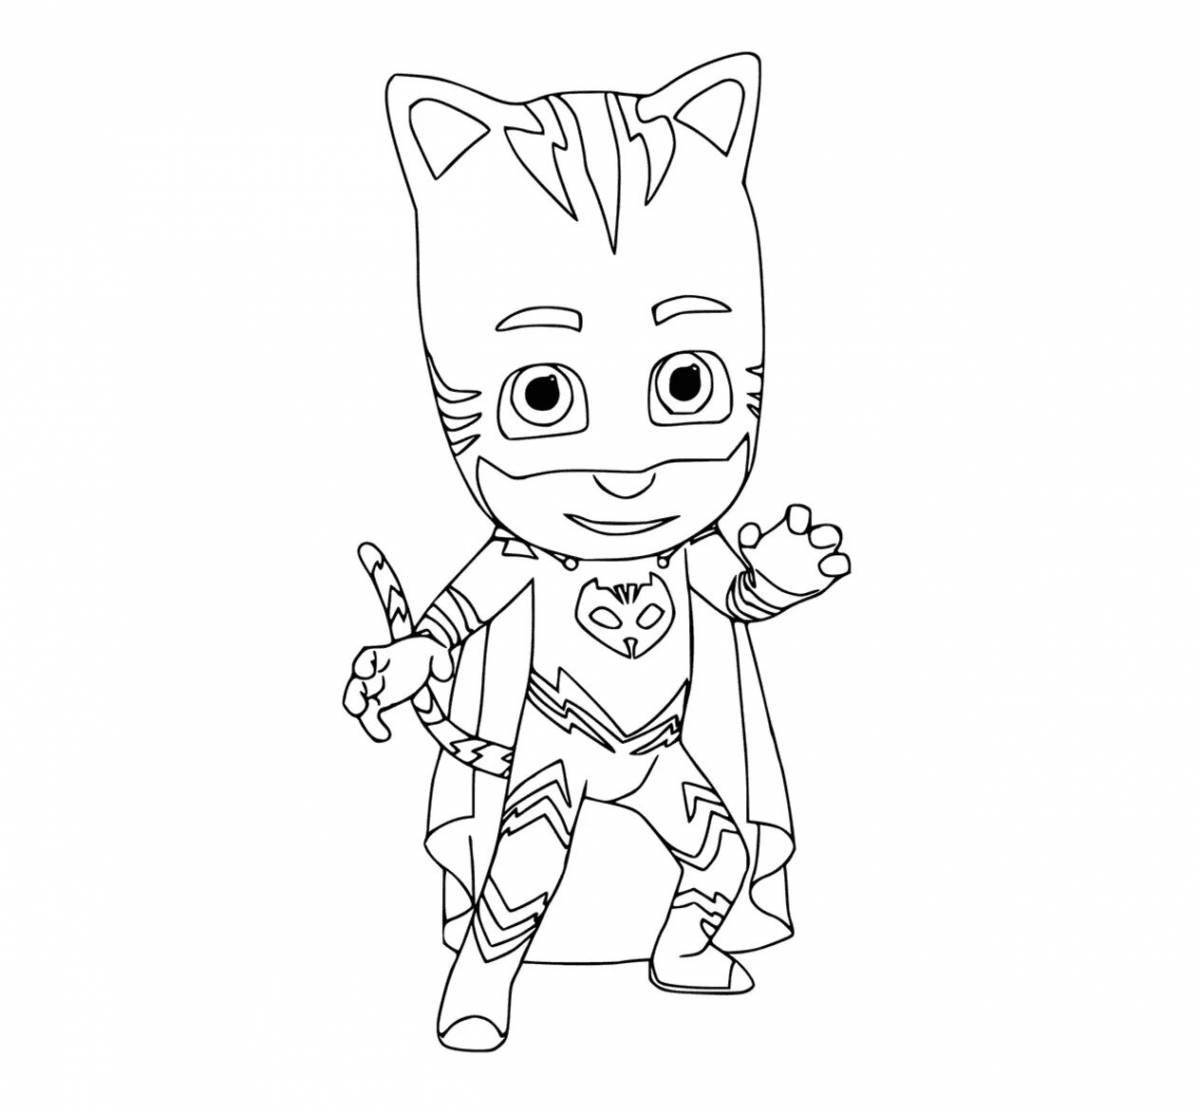 Playful catboy coloring page